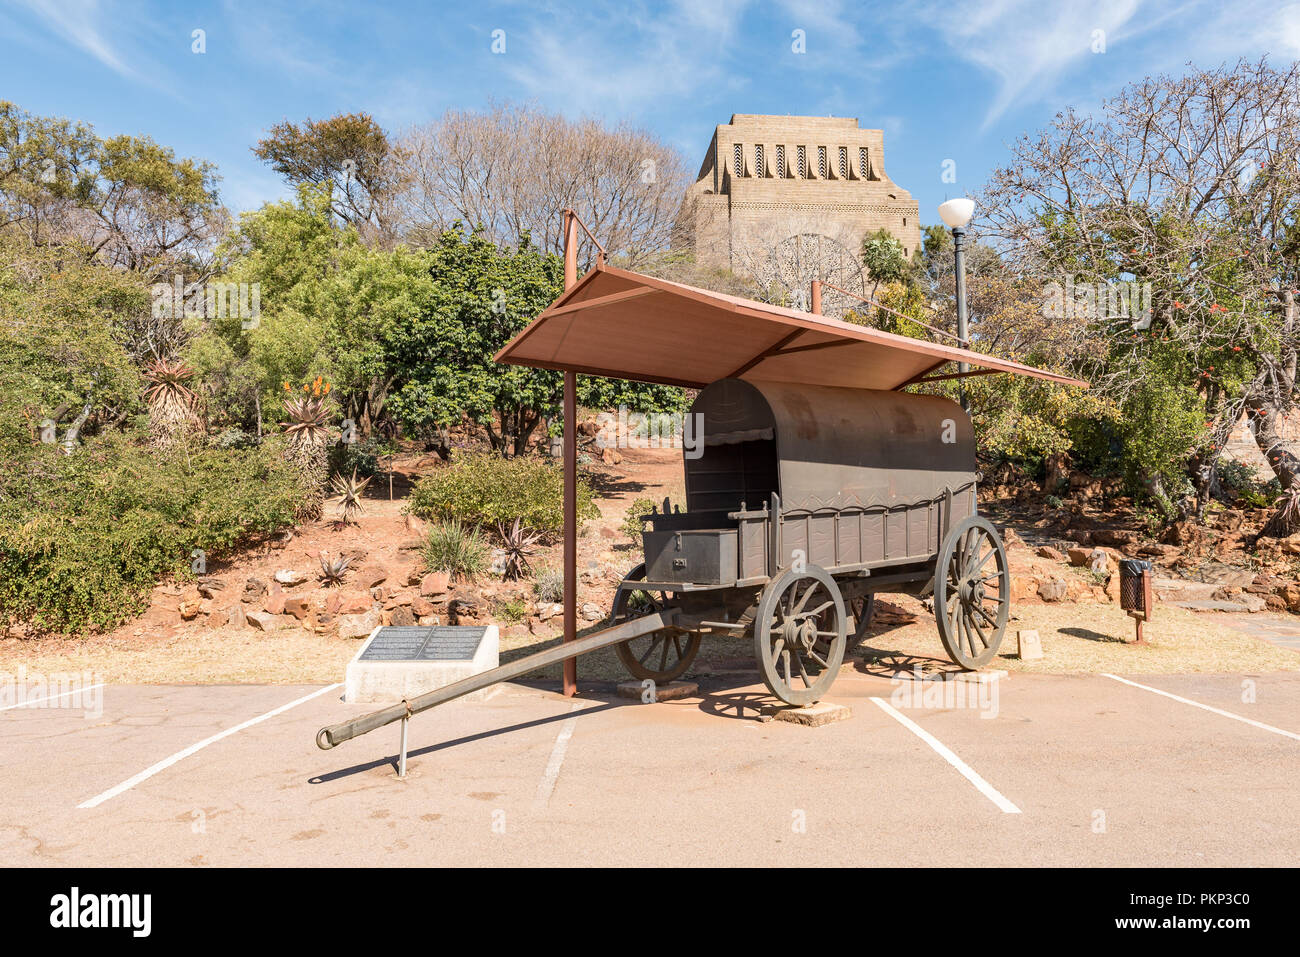 PRETORIA, SOUTH AFRICA, JULY 31, 2018: A bronze replica of a jawbone wagon with the Voortrekker Monument in Pretoria in the back Stock Photo